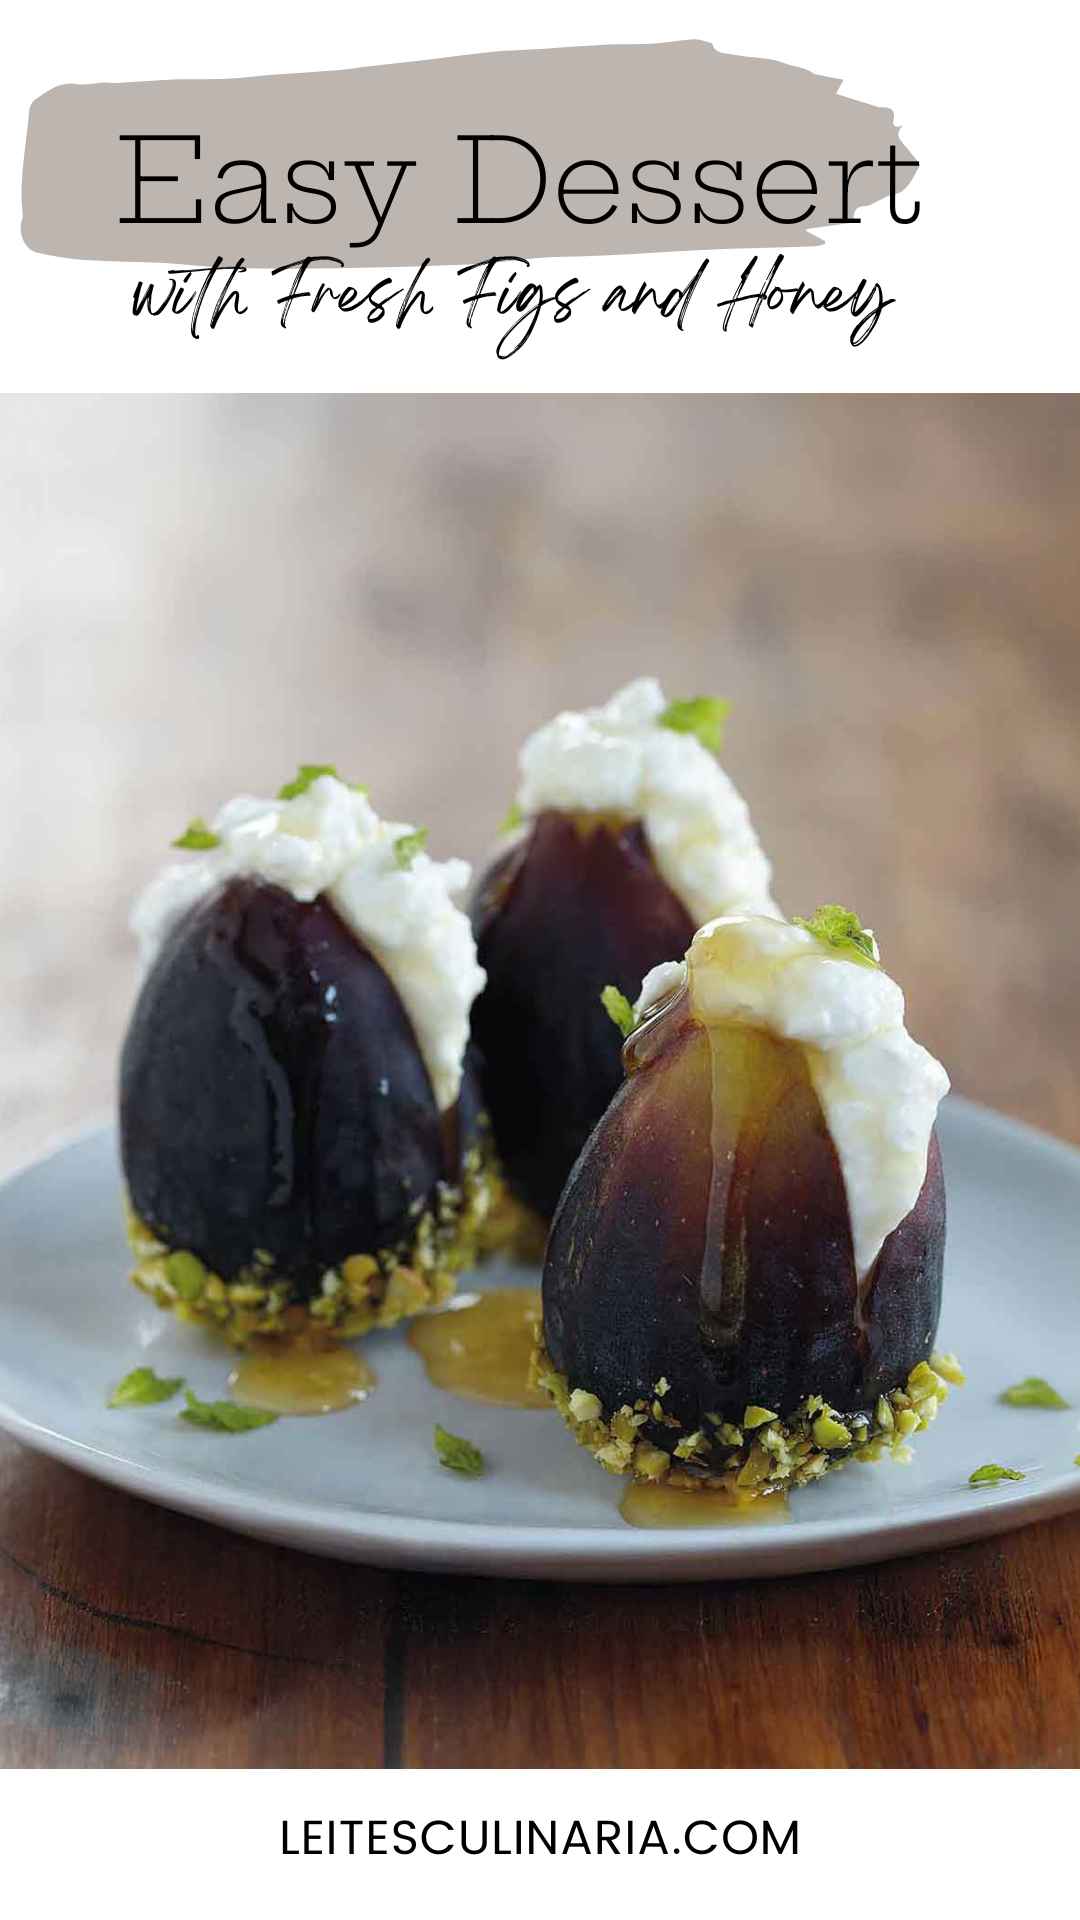 Three figs filled with ricotta cheese and topped with honey on a plate.